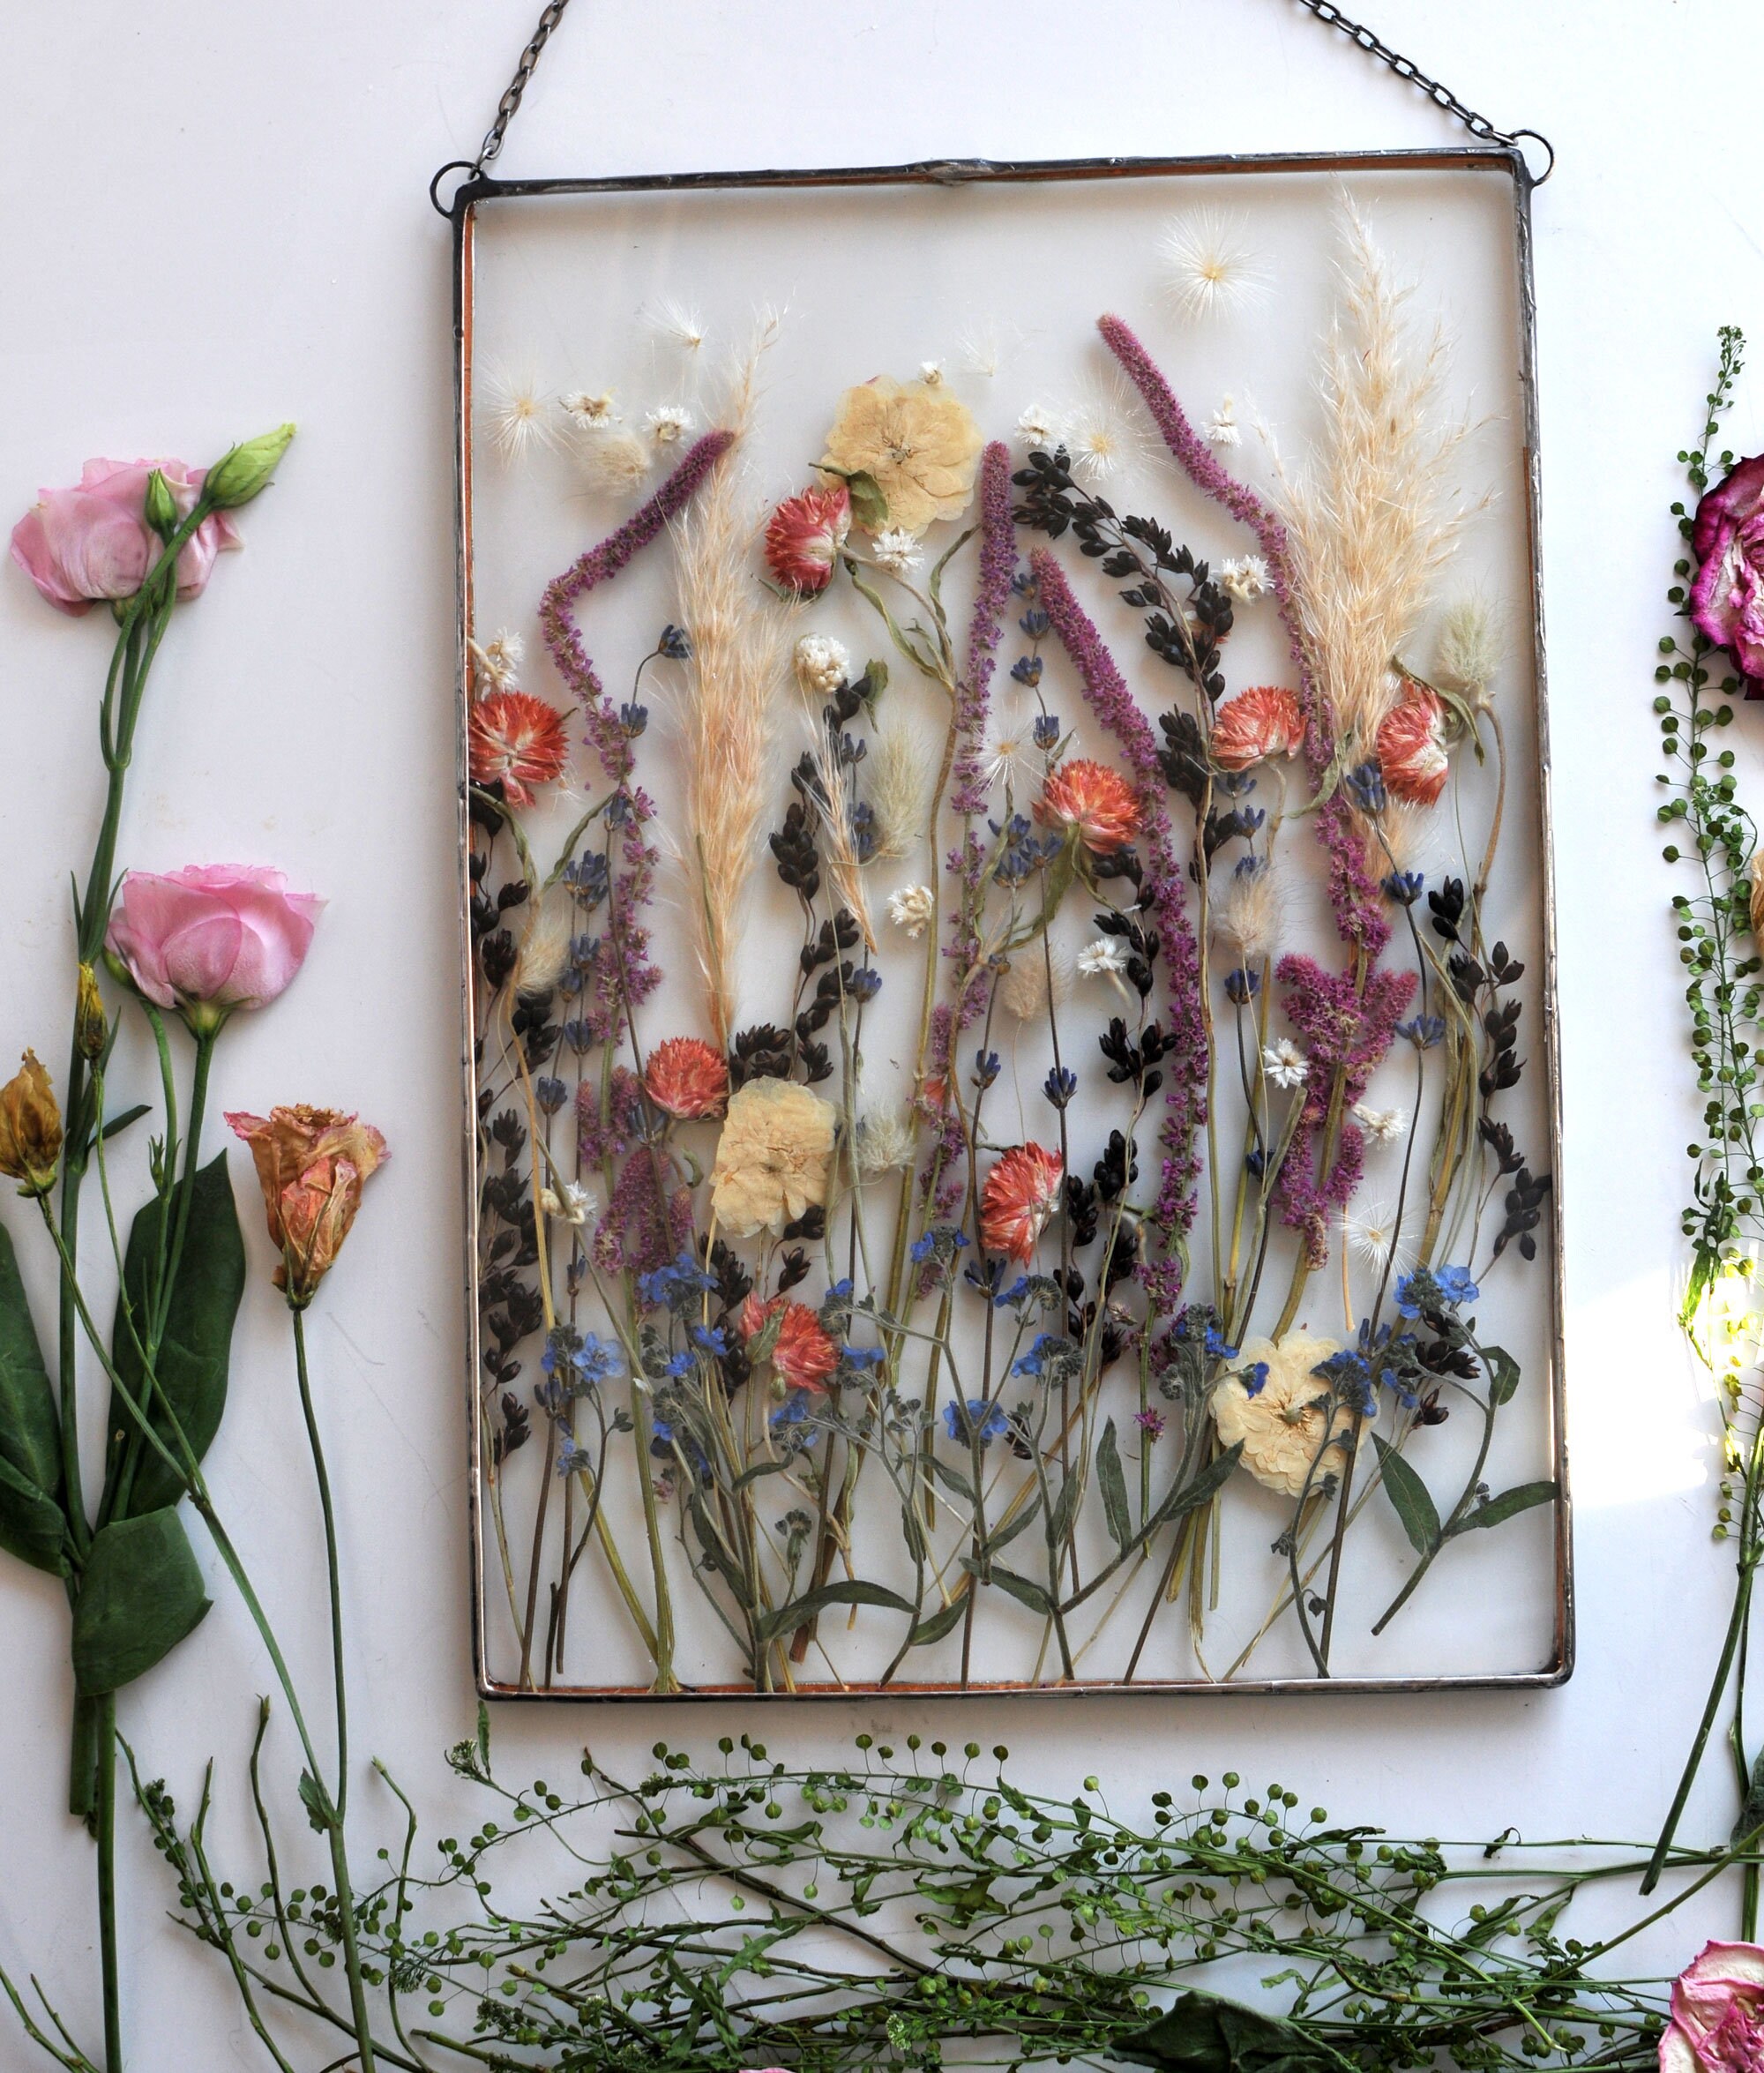 Framed Flowers, Dried Flower Frame, Stained Glass, Floating, Wall Hanging,  Window Hangings, Pressed Flower Frame, Housewarming Gift 